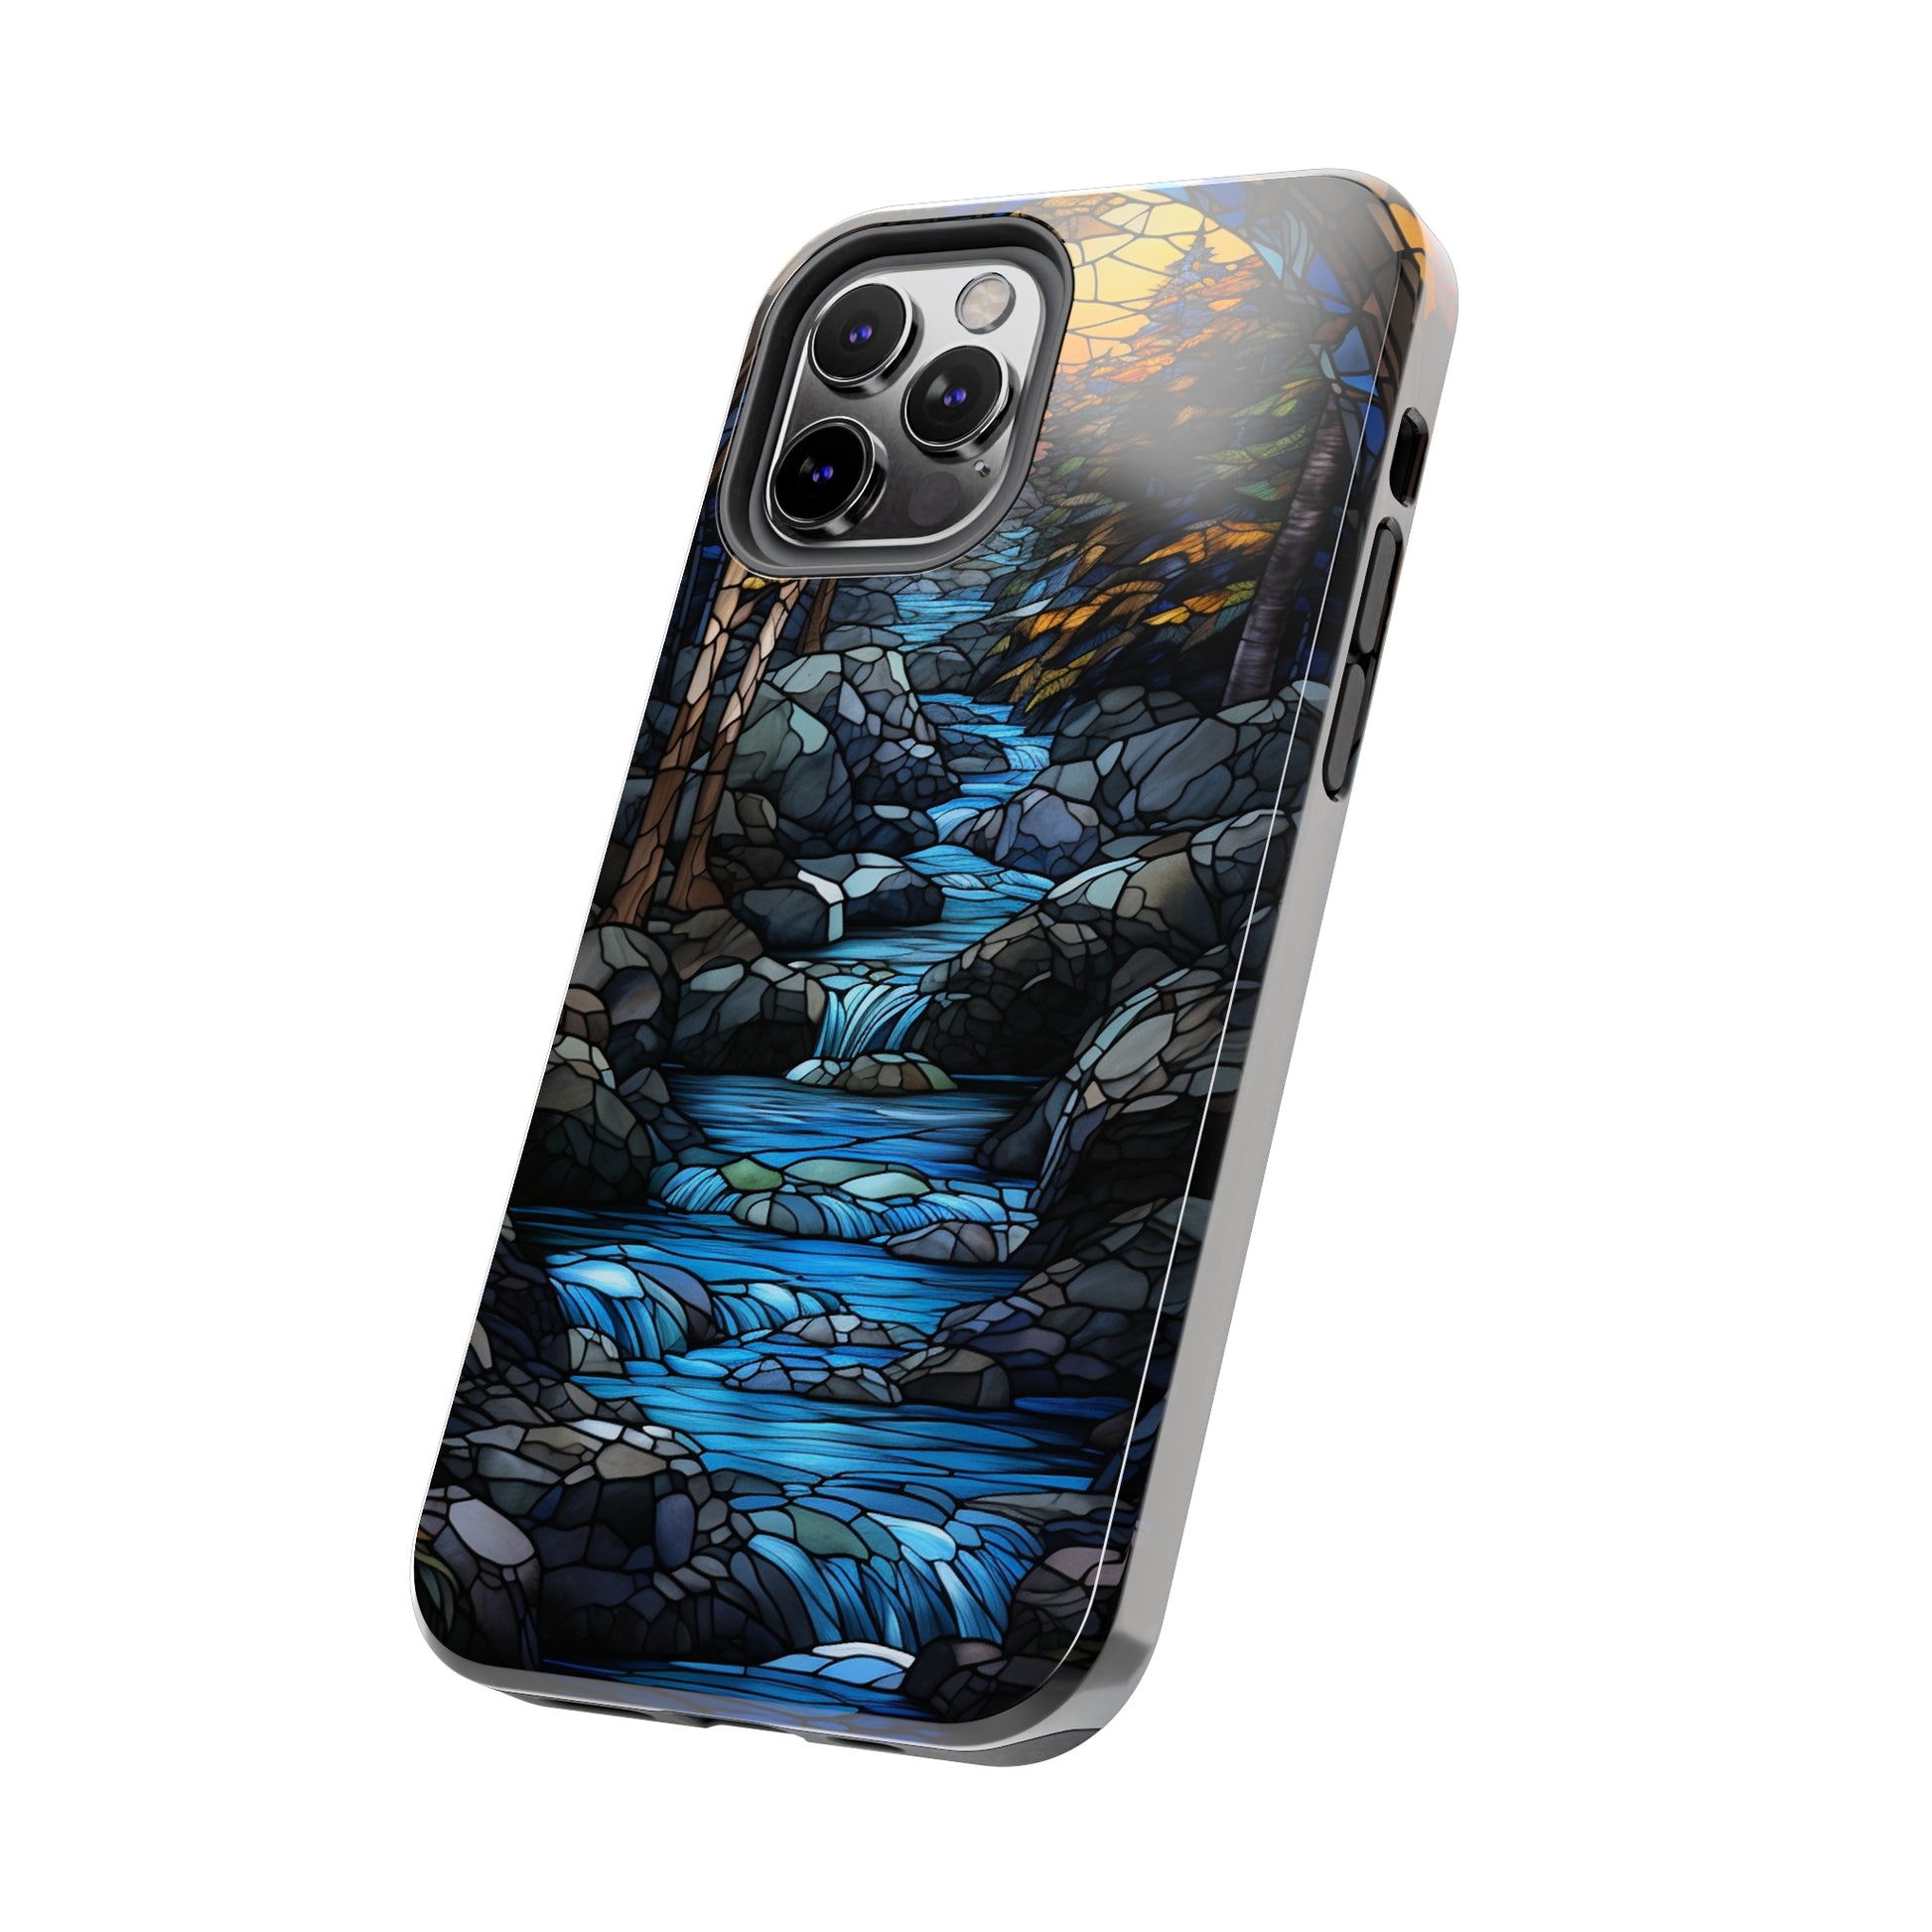 Artistic iPhone 7 case with river design